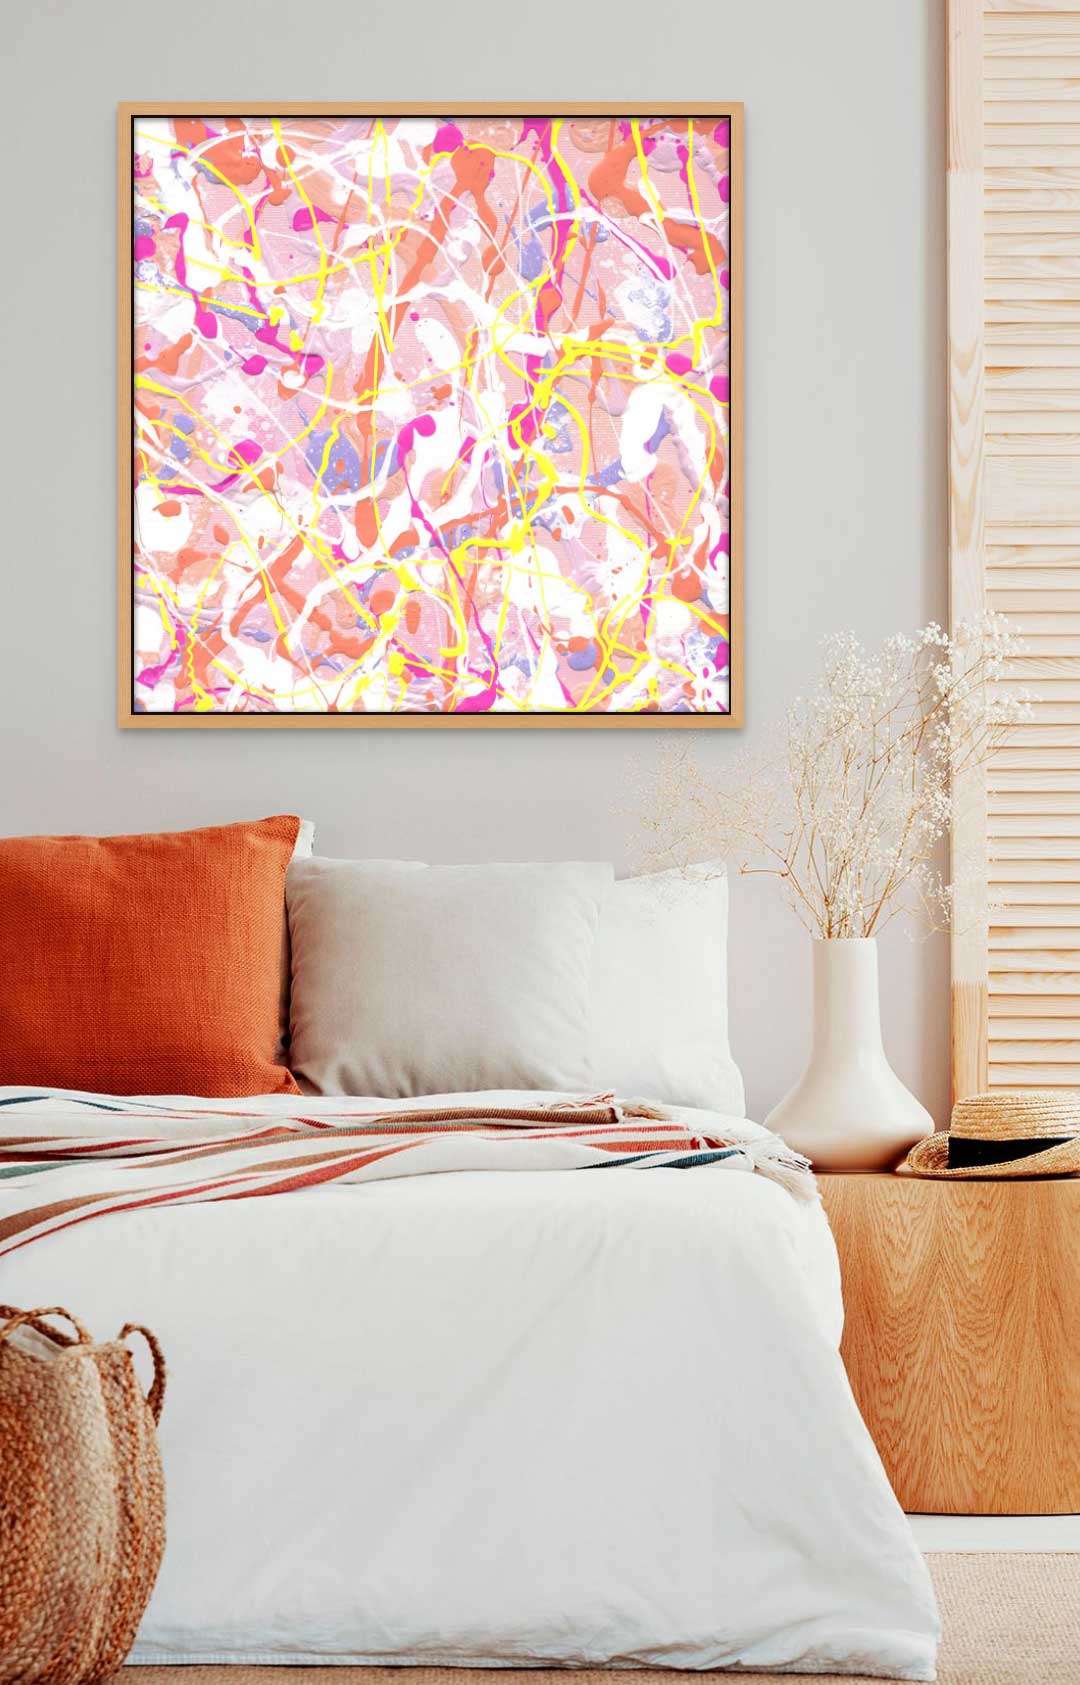 'Cupcake III' Fine Art Print  seen hanging in bedroom, framed in Hand-Cut Oak Wood  Custom Made  in Australia Frame. After original abstract painting by Bridget Bradley. Large Prints Available